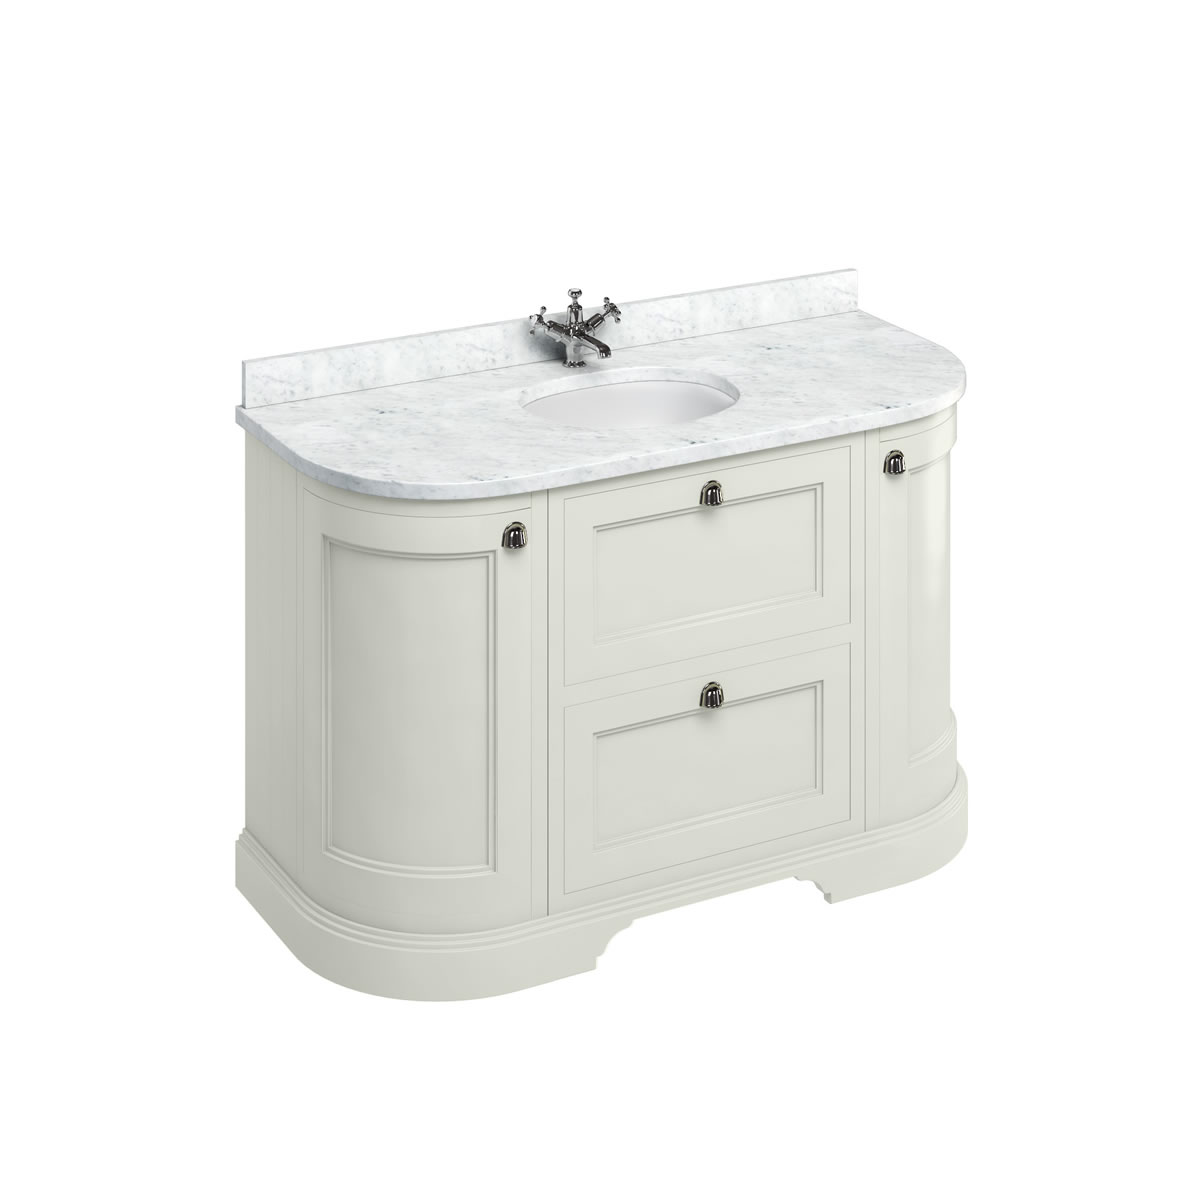 Freestanding 134 Curved Vanity Unit with drawers - Sand White and Minerva Carrara white worktop with integrated white basin